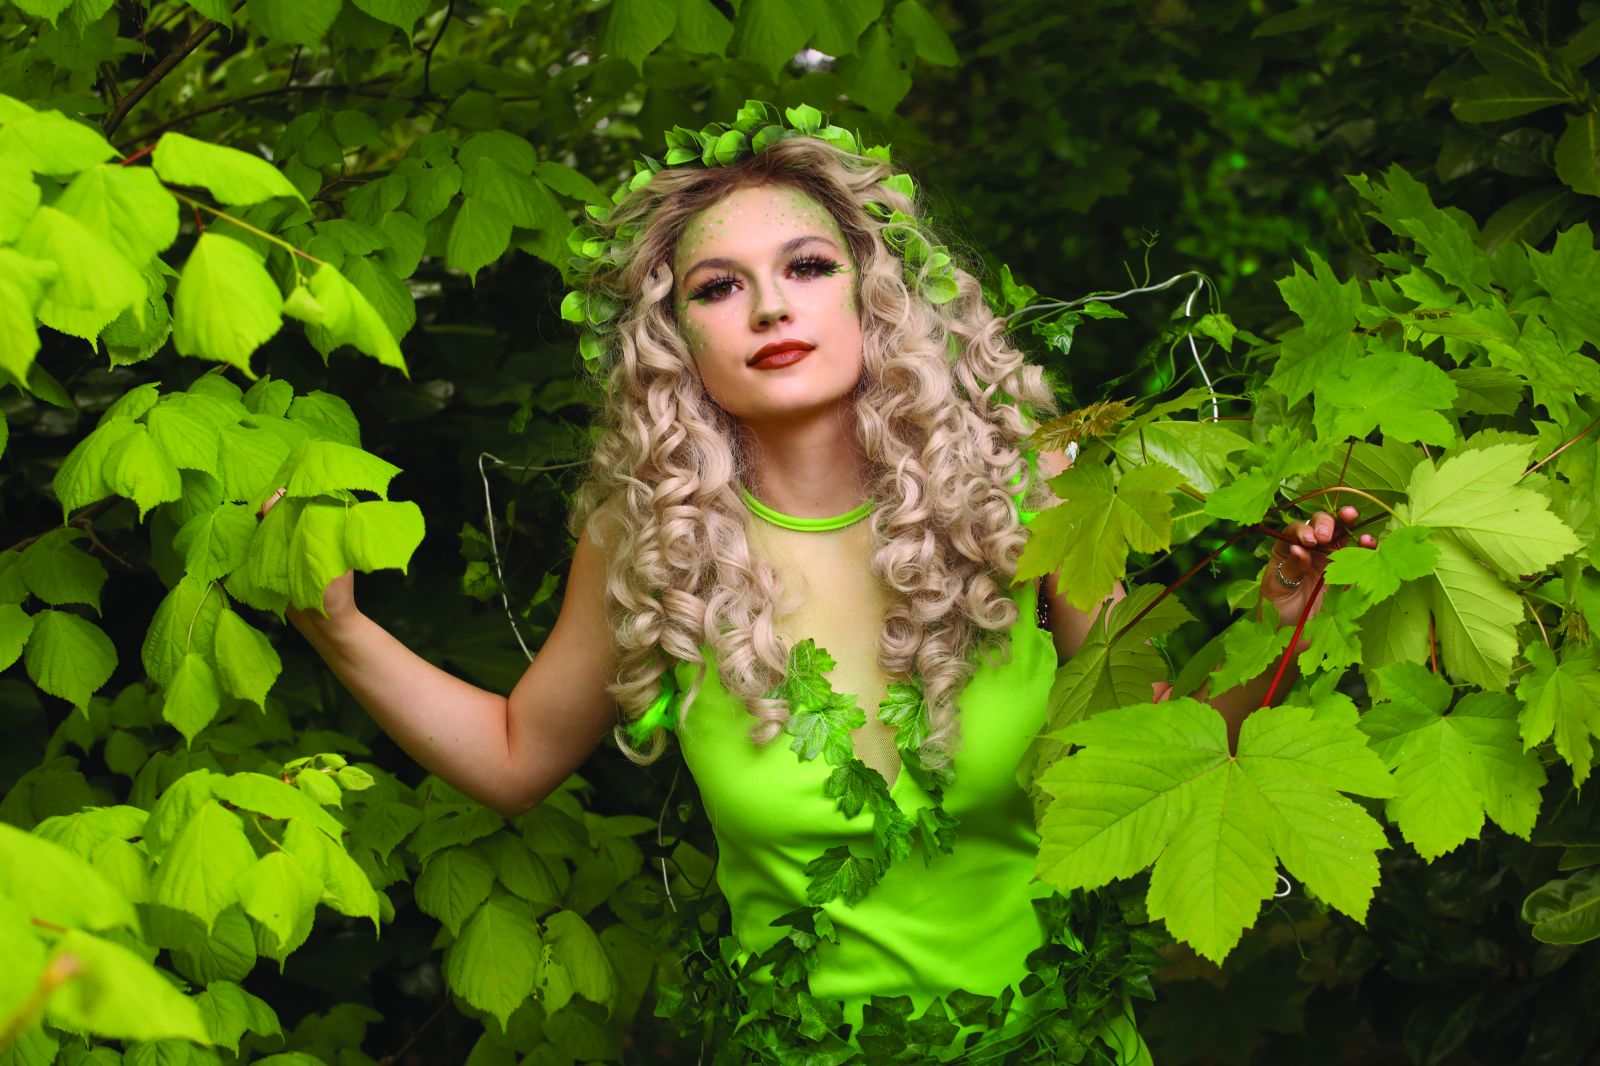 Hair and Media make up student's work, woman in green forest